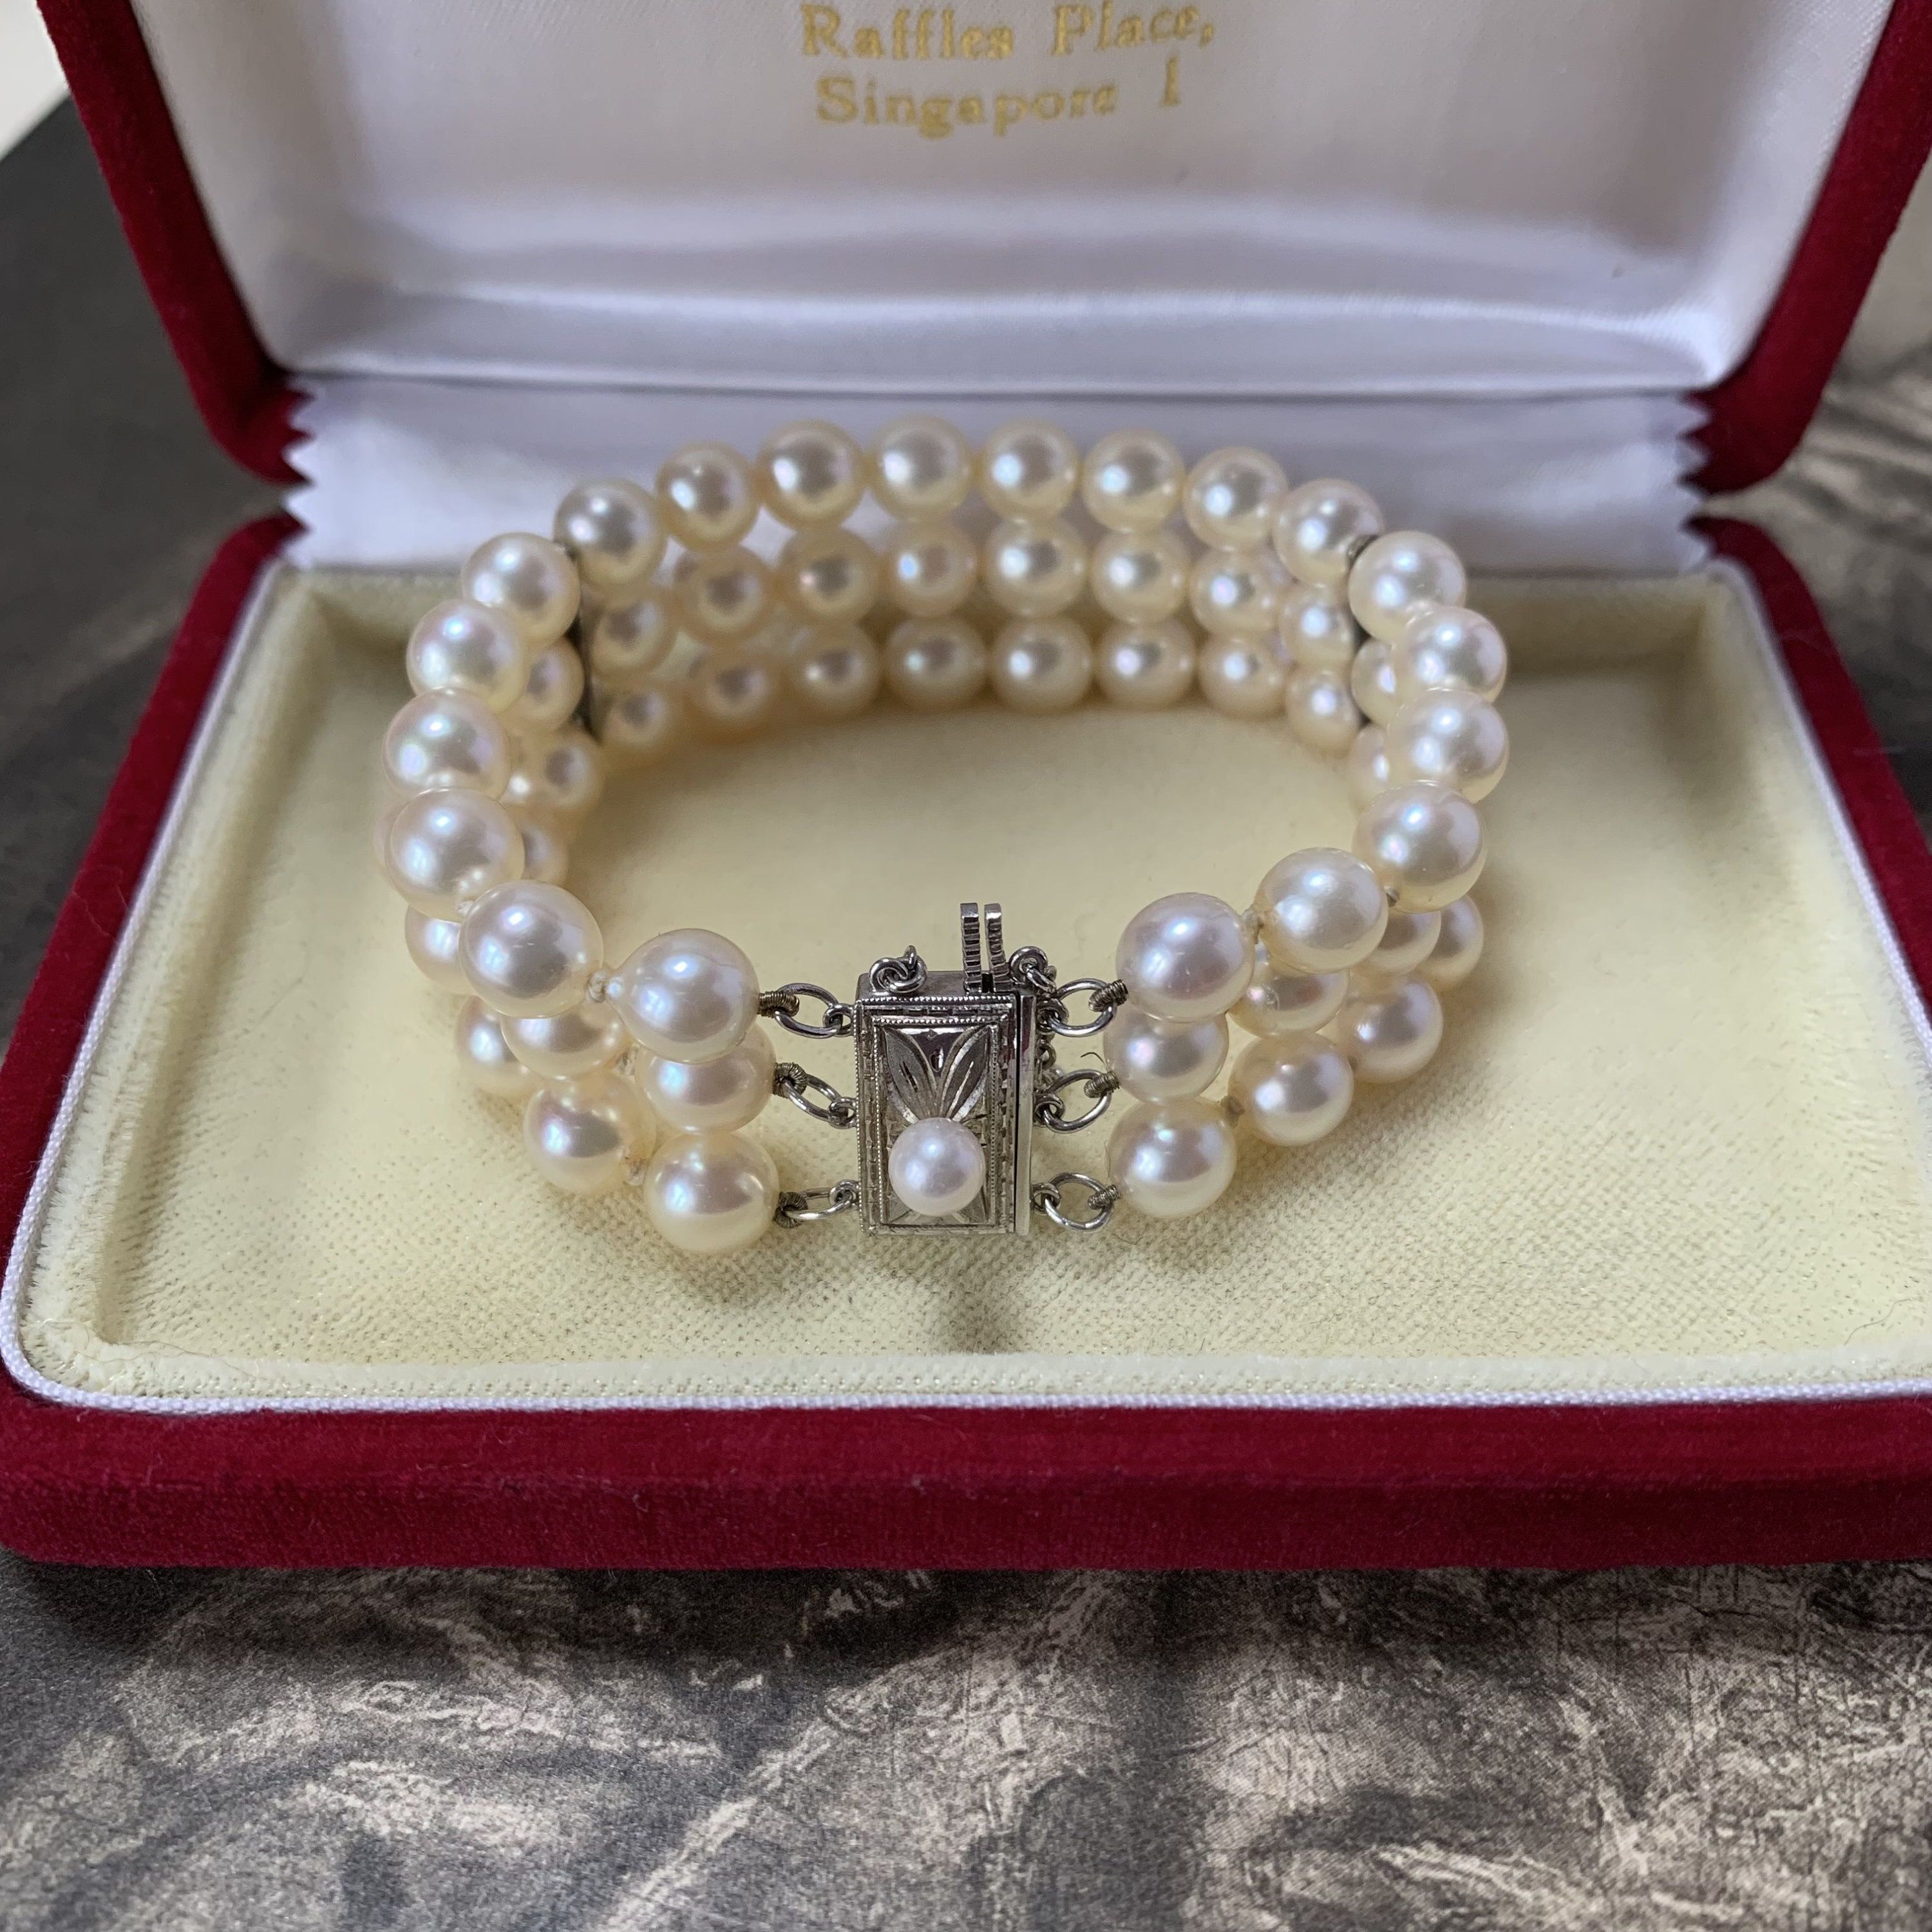 Mikimoto Childs Pearl Bracelet 3 Row With Silver & Clasp. A Beautiful Unique Piece Of Quality Vintage Jewellery